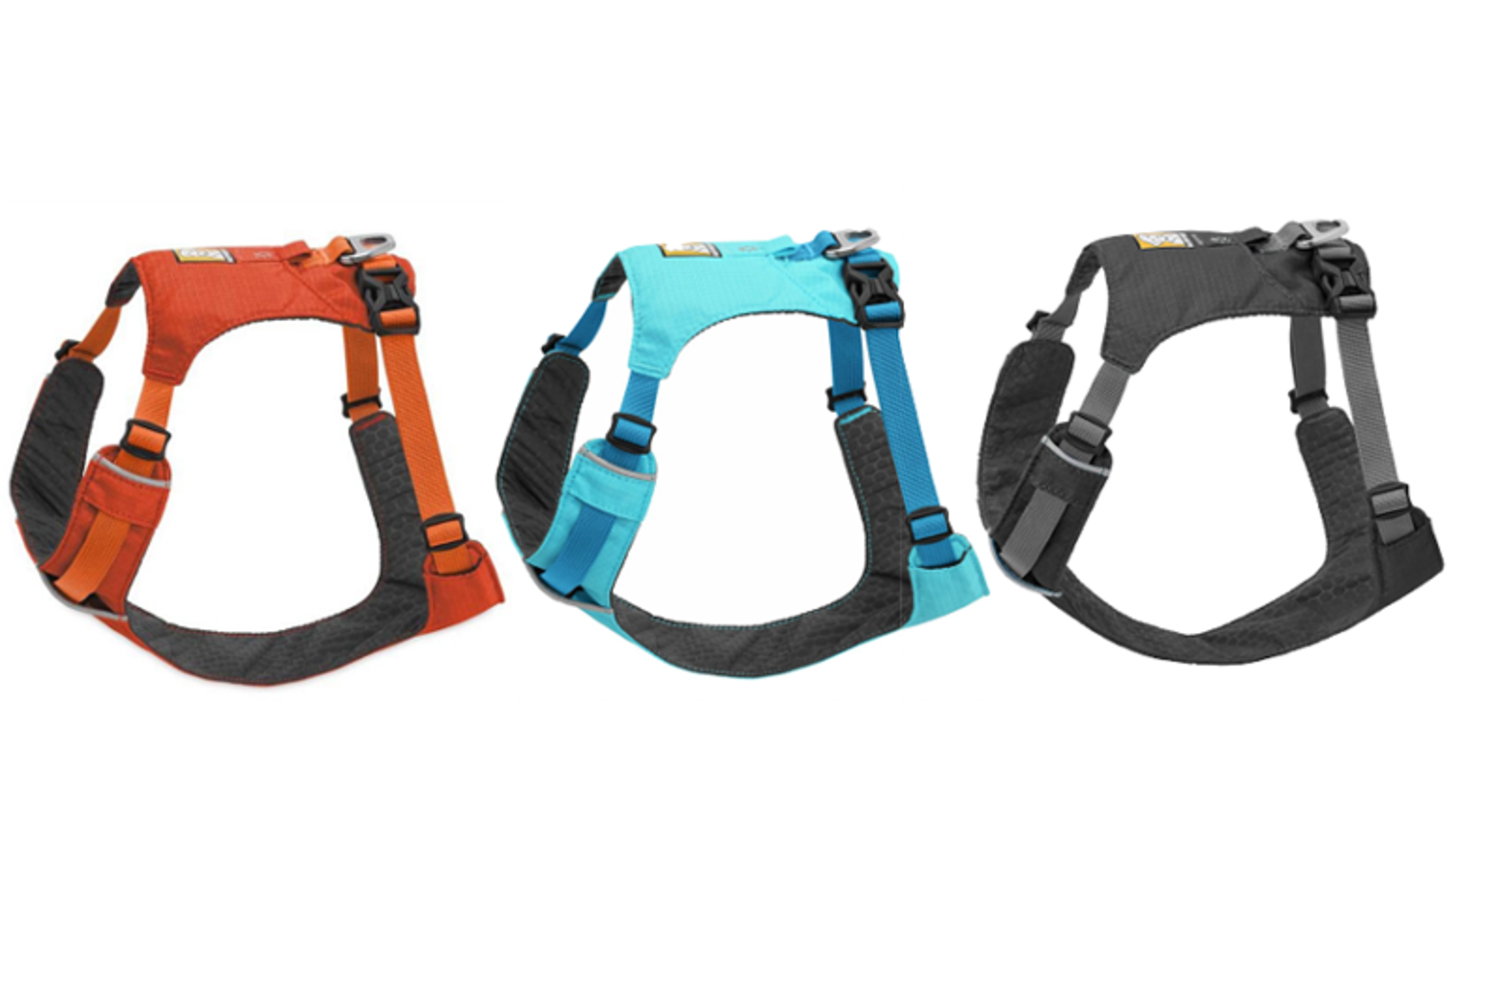 vedtage fejl toksicitet RUFFWEAR HI AND LIGHT HARNESS - Paws on Chicon